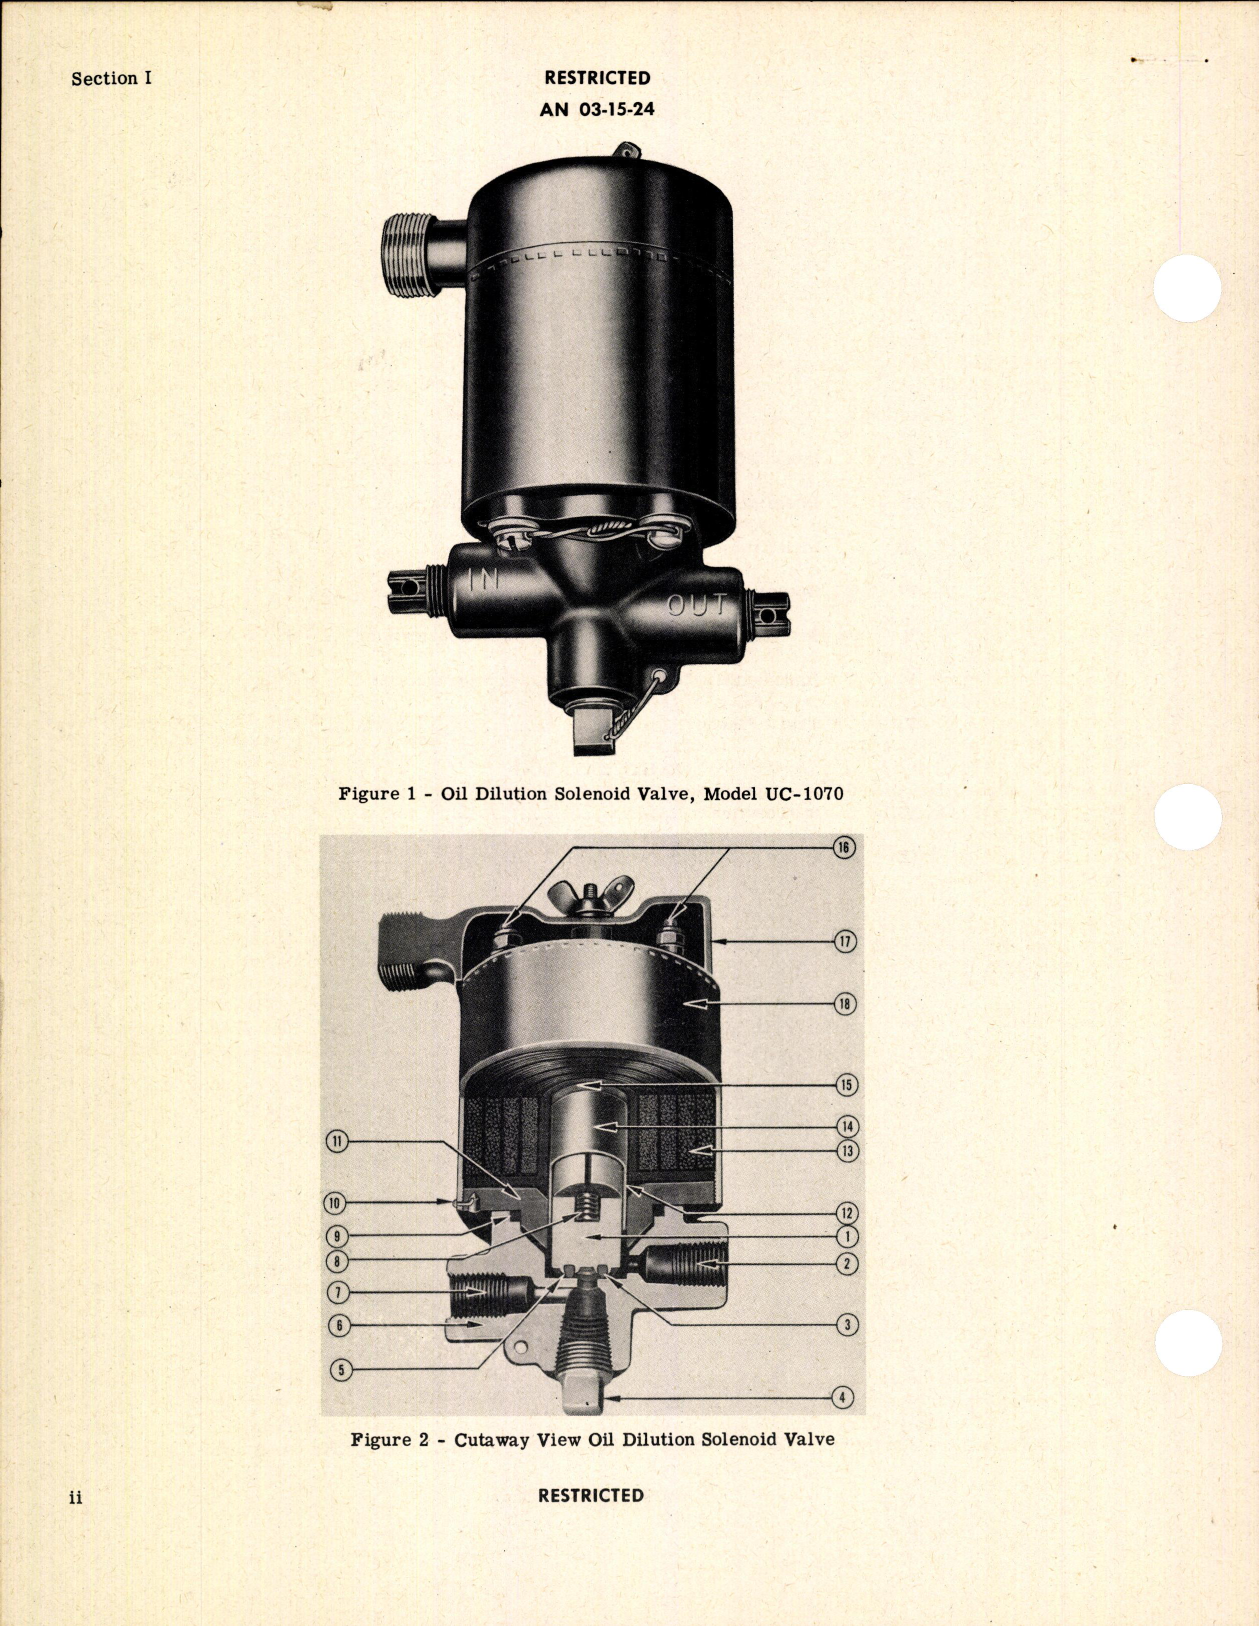 Sample page 4 from AirCorps Library document: Parts Catalog for Oil Dilution Solenoid Valve